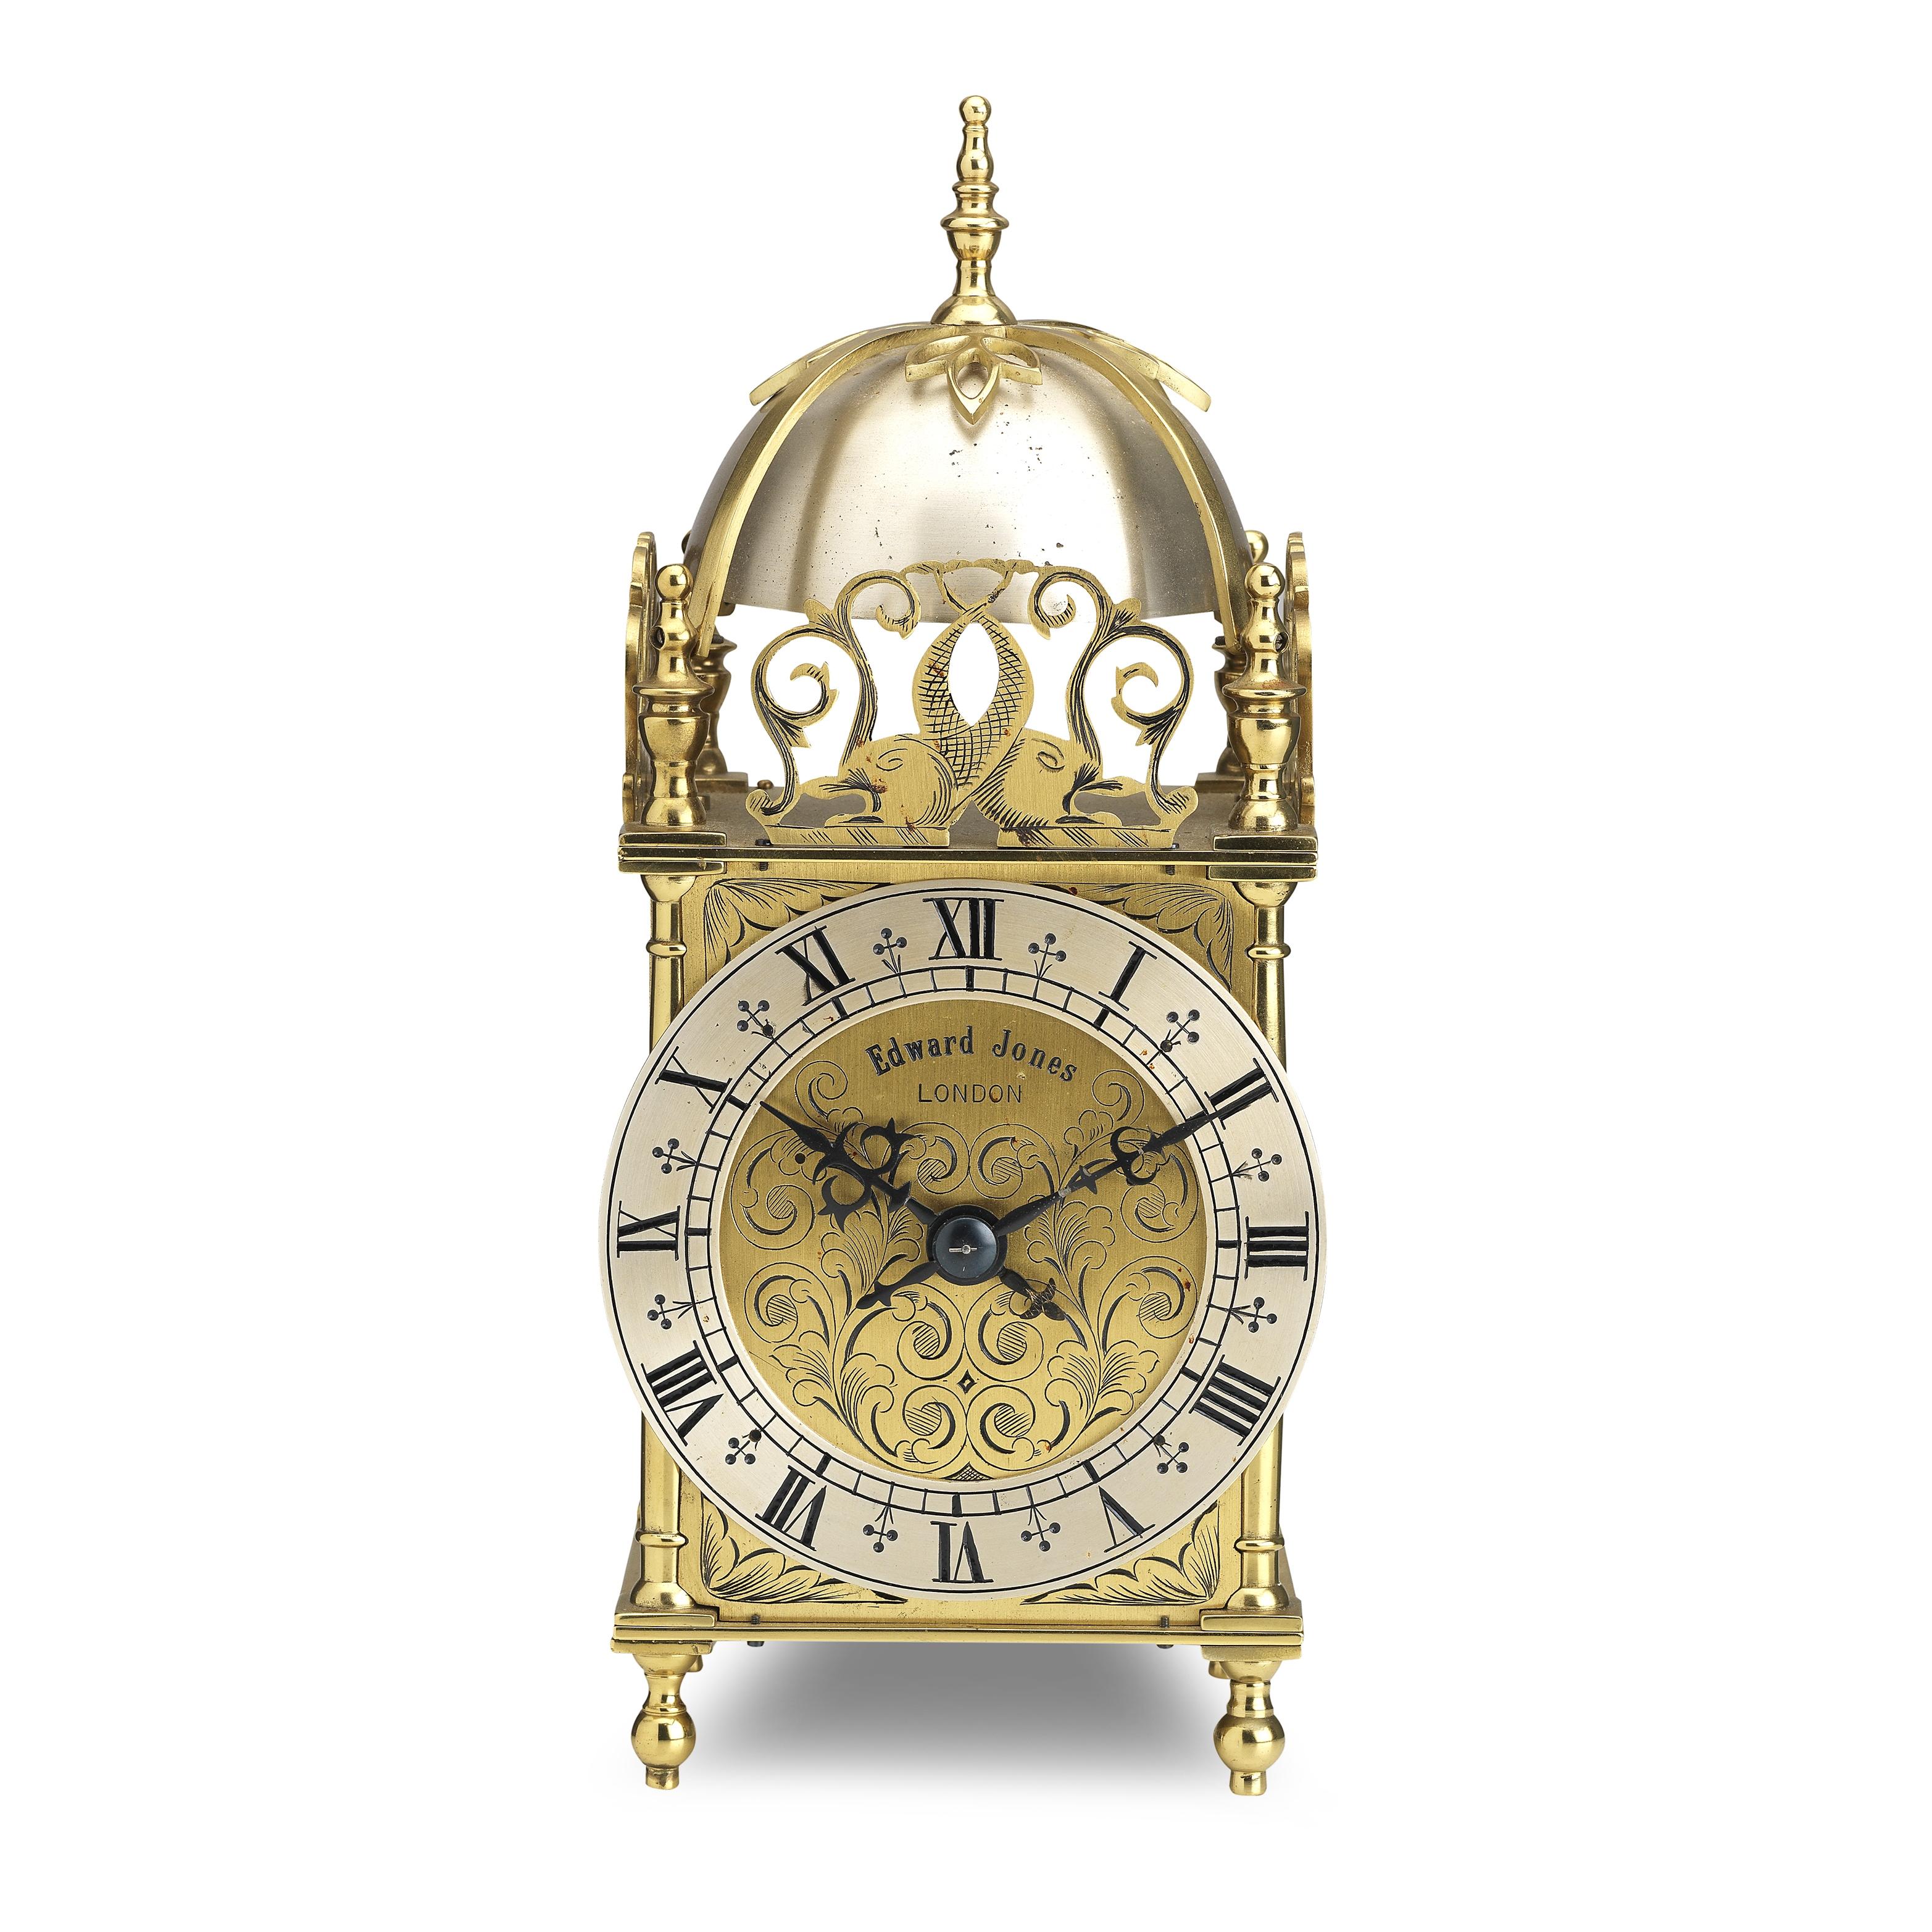 An early 20th century Lantern clock style timepiece Inscribed to the dial Edward Jones, London